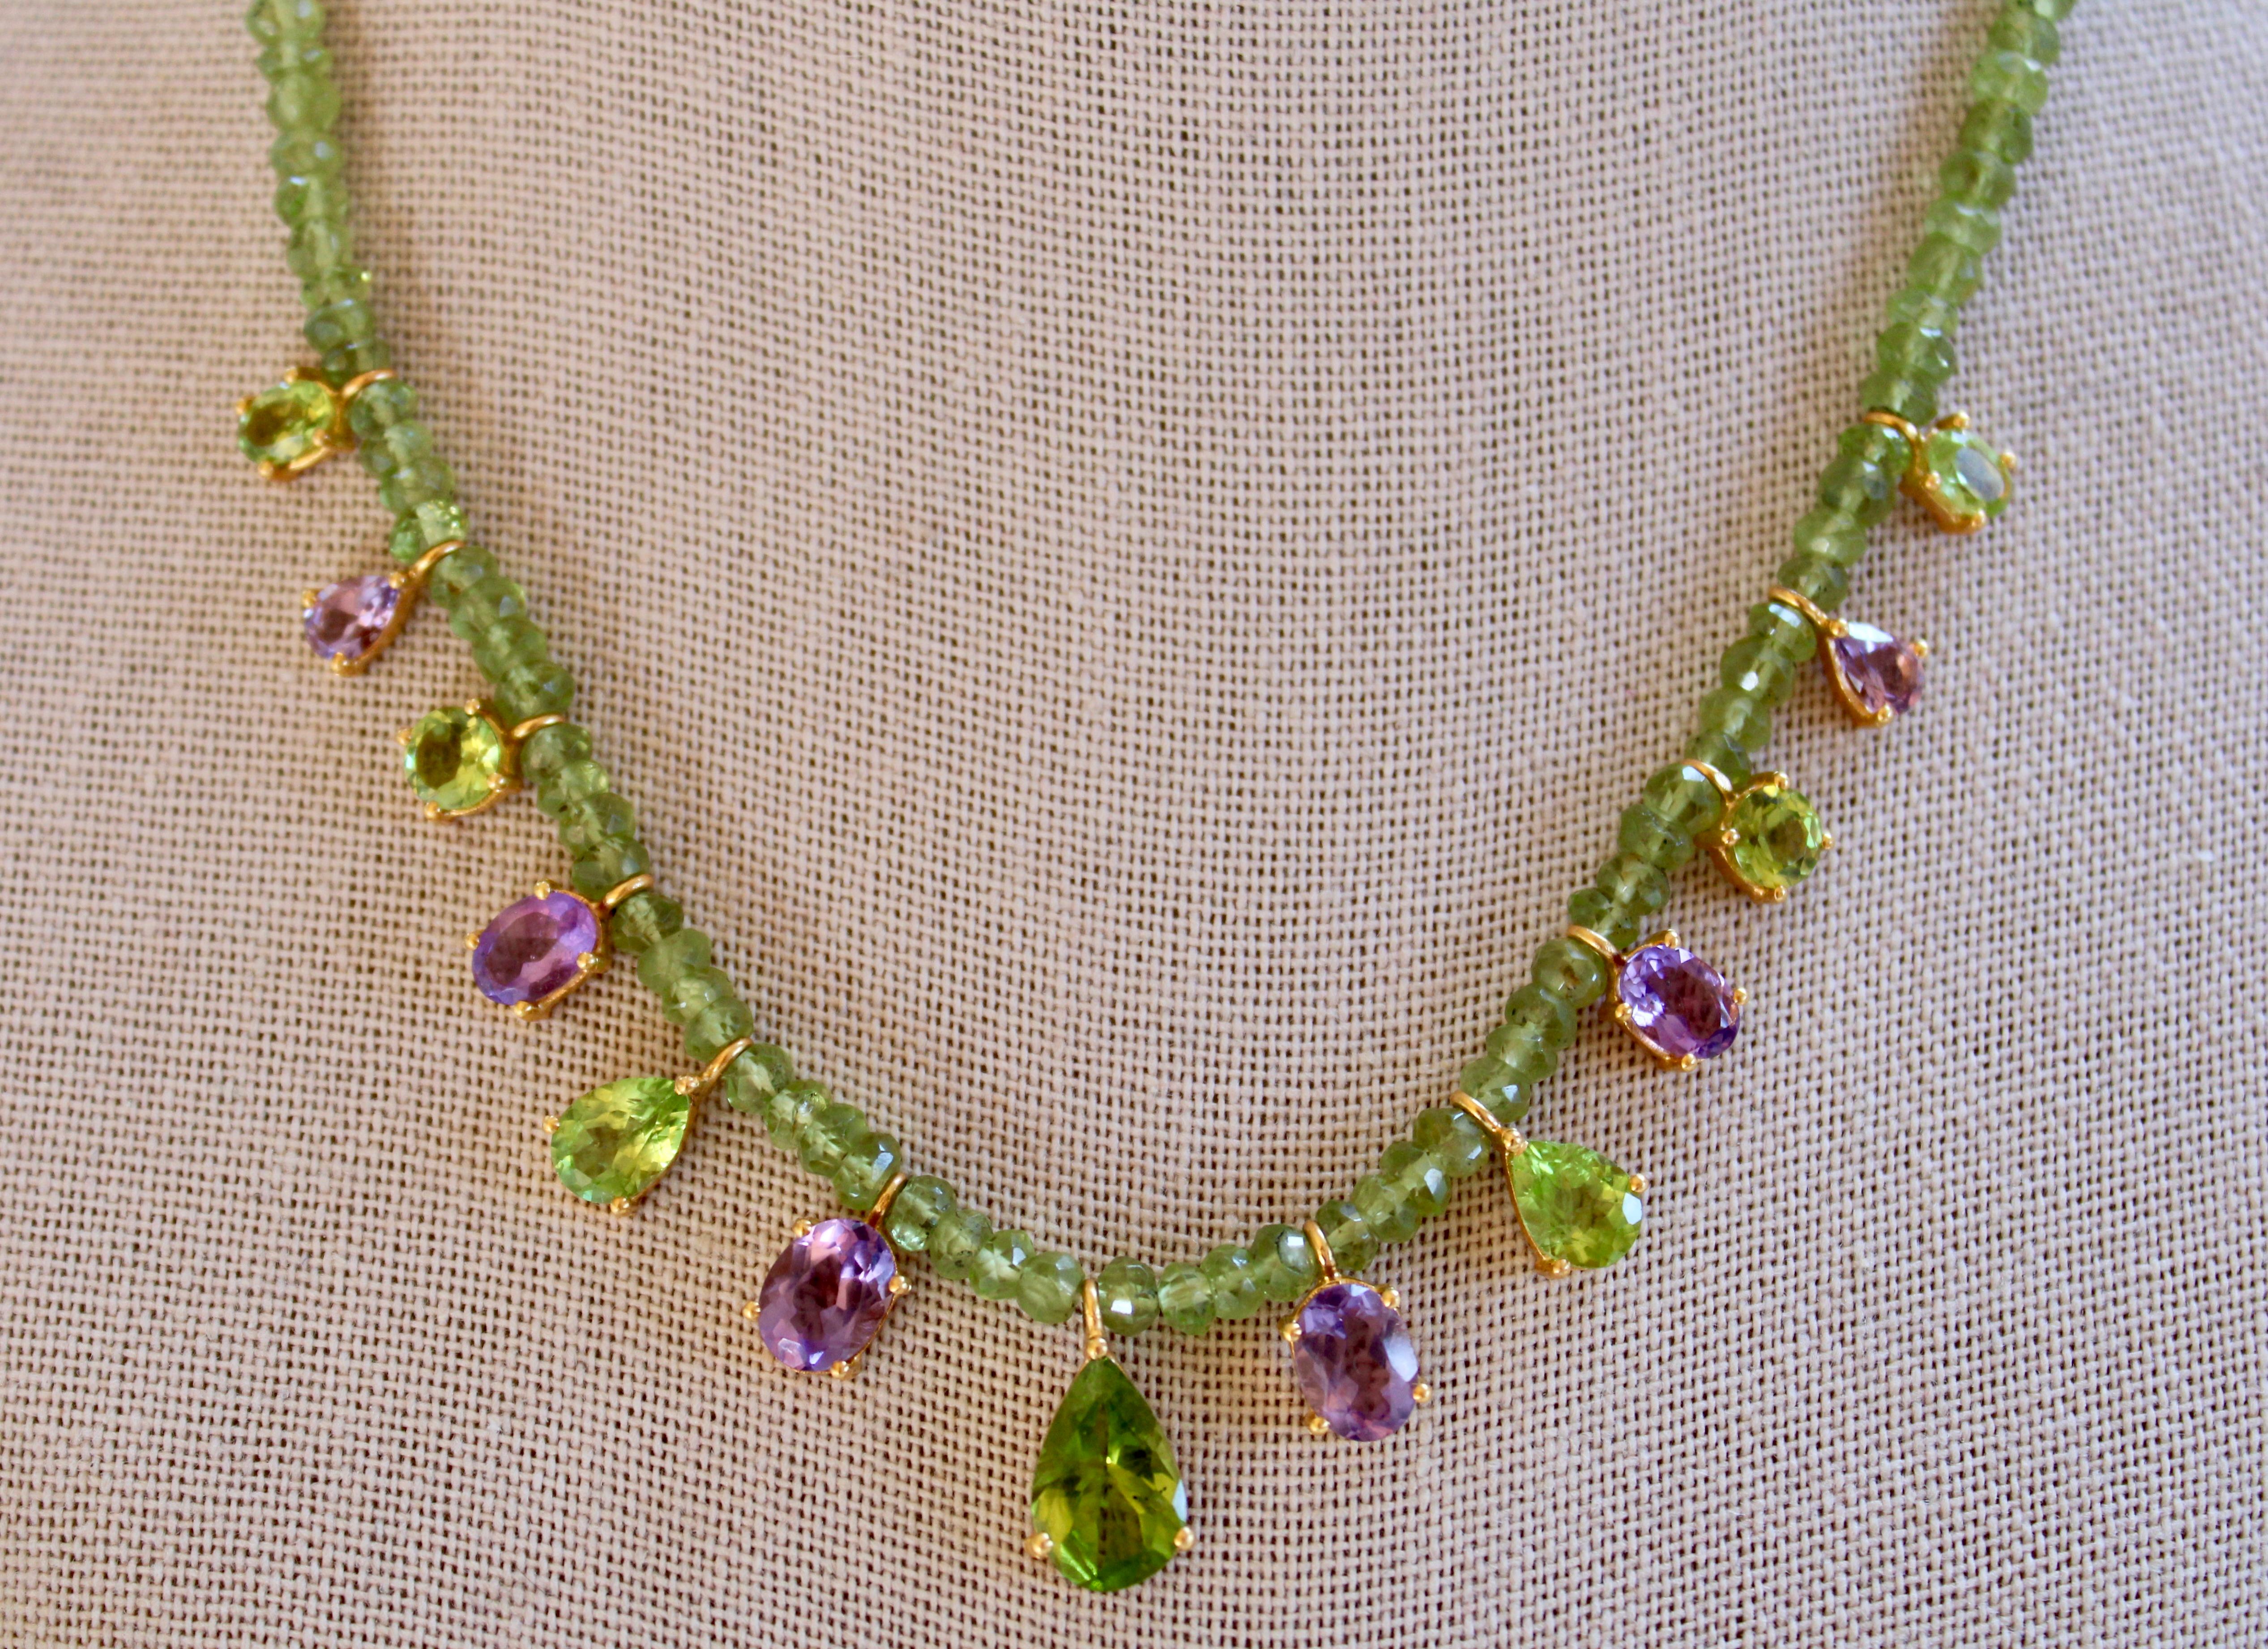 19.75 Ct of green Peridot & purple Amethyst adorn this beautiful peridot beaded necklace. This necklace is comprised of 7 green Peridot gemstones including 2 ovals, 2 rounds, and 3 pears, with the center peridot pear stone at almost 4 carats. 
There